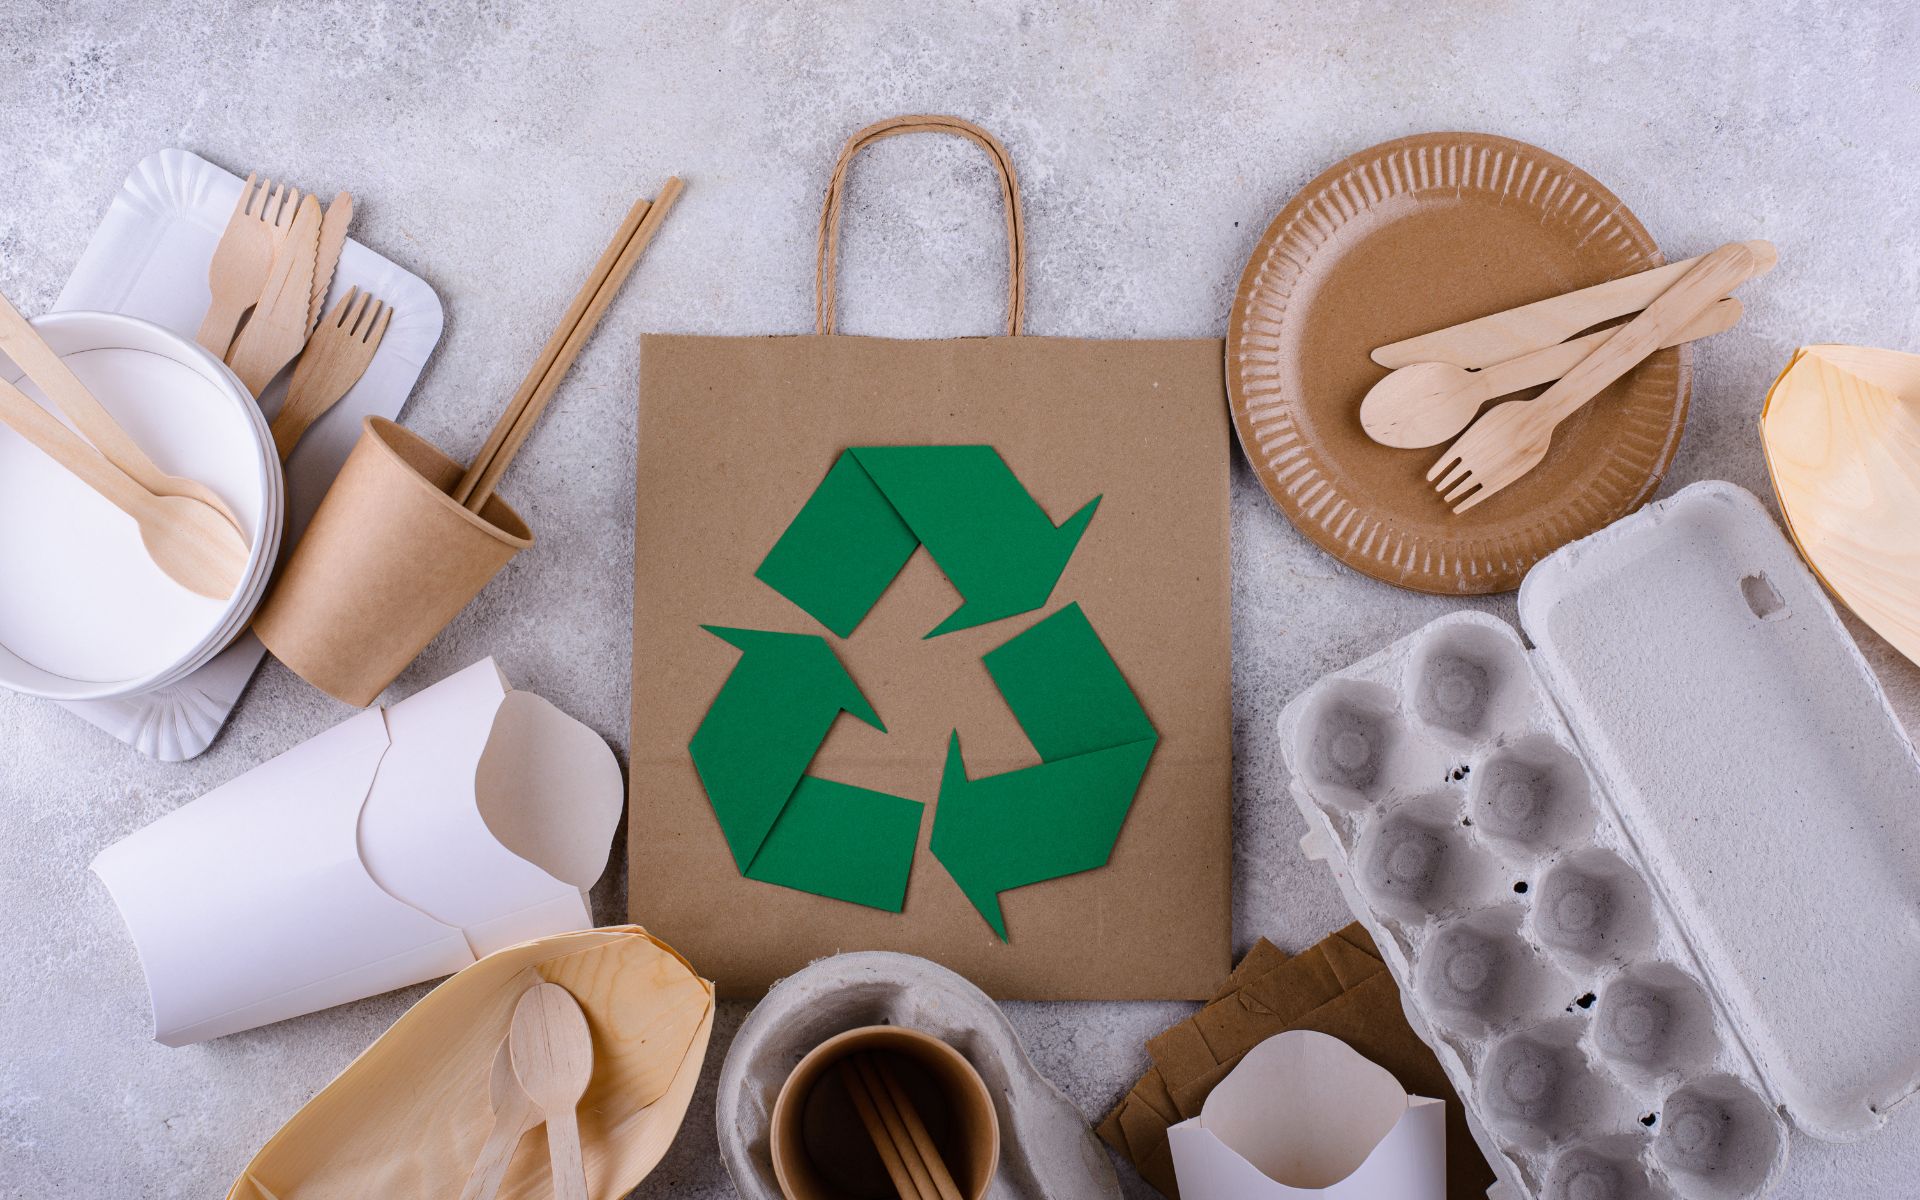 Choose Products with Eco-Friendly Packaging